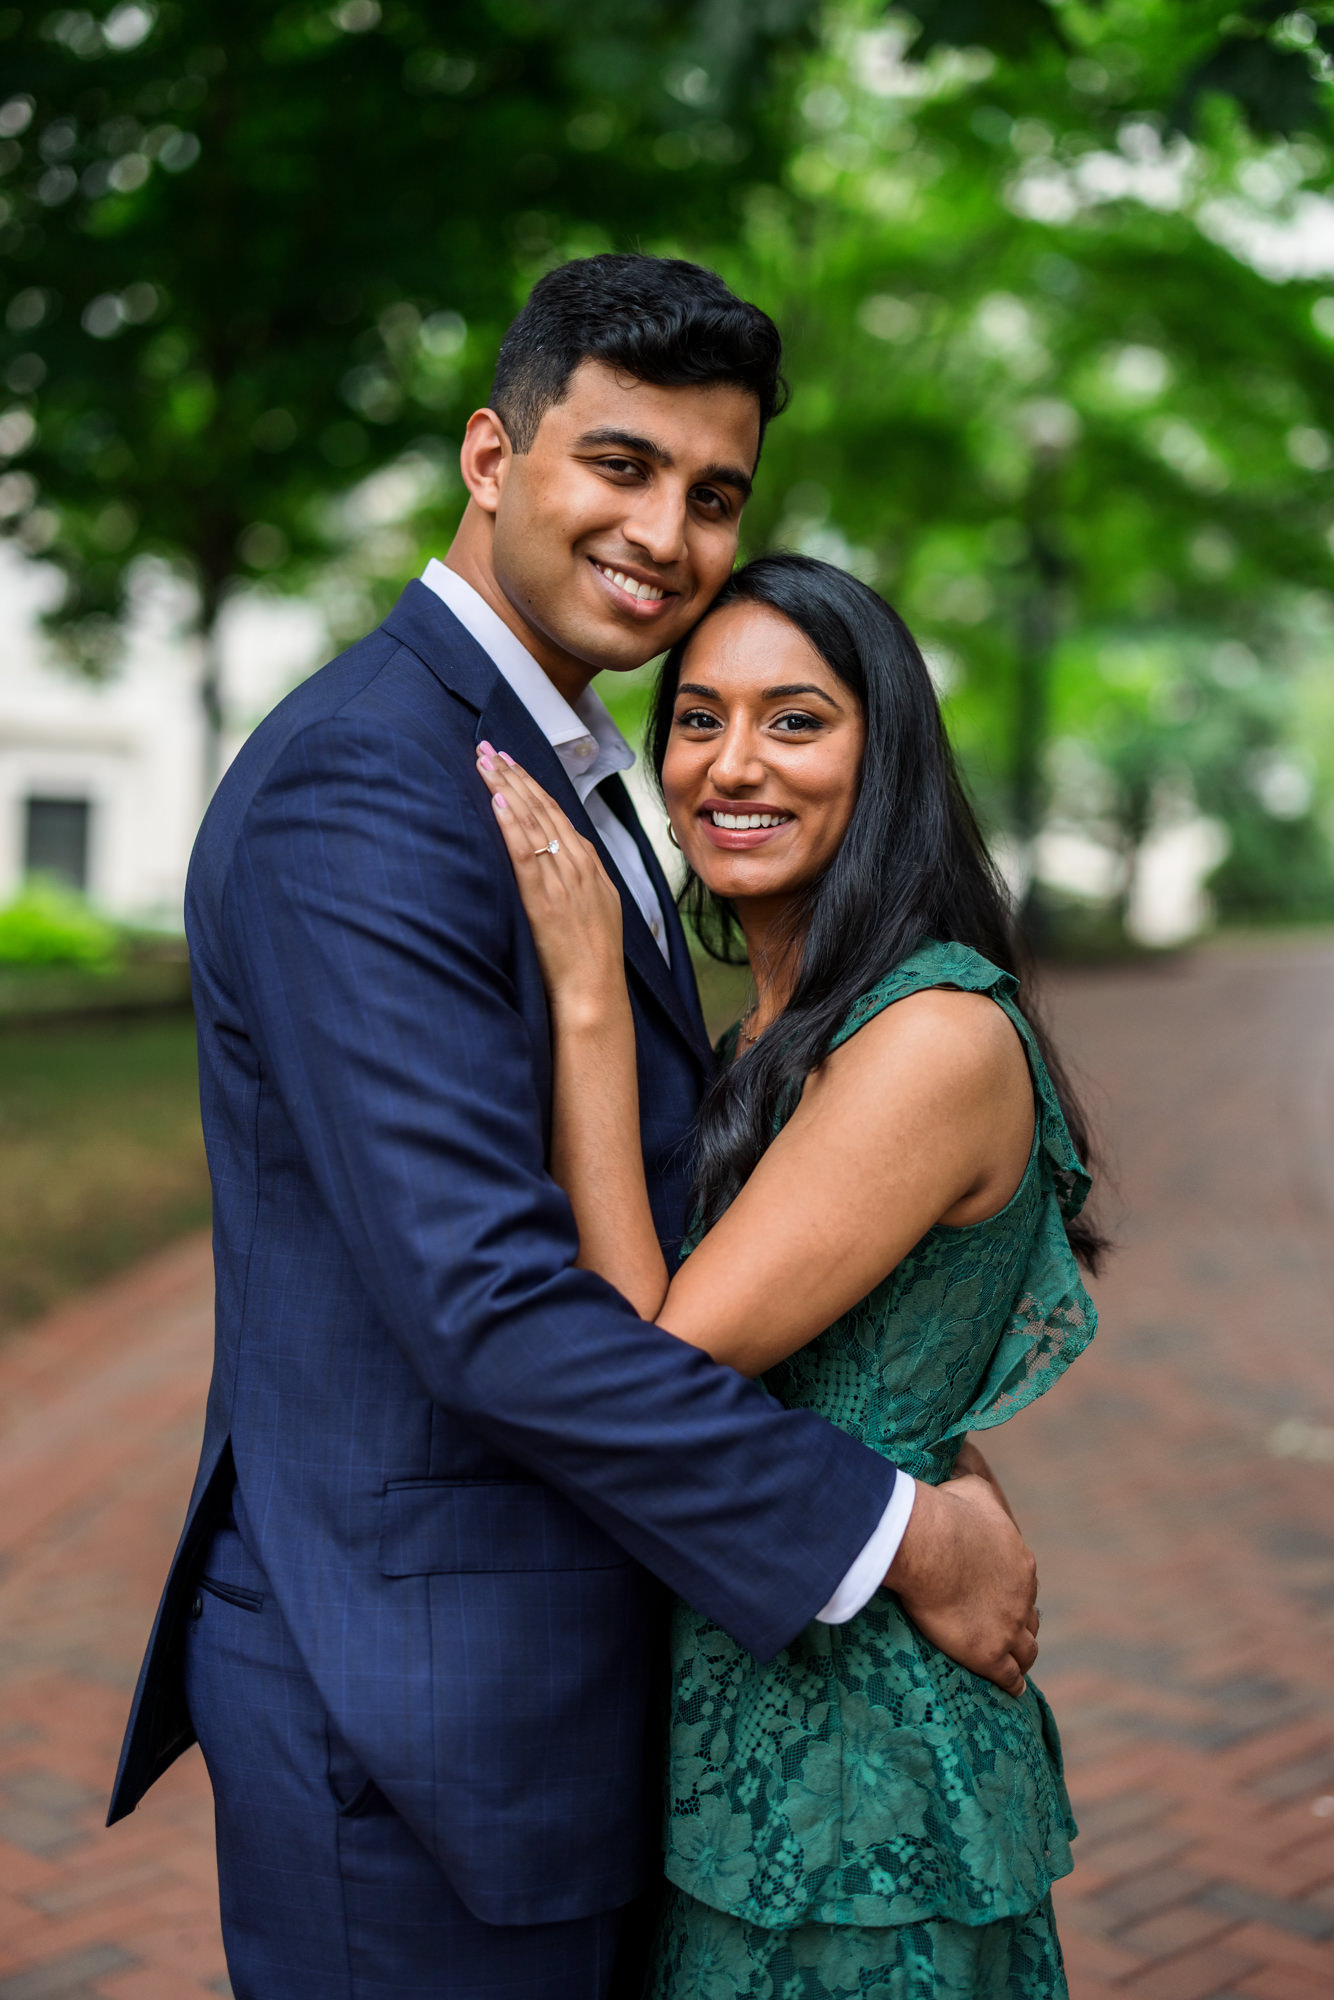 man and woman embracing, woman wearing emerald green dress and man wearing navy blue suit